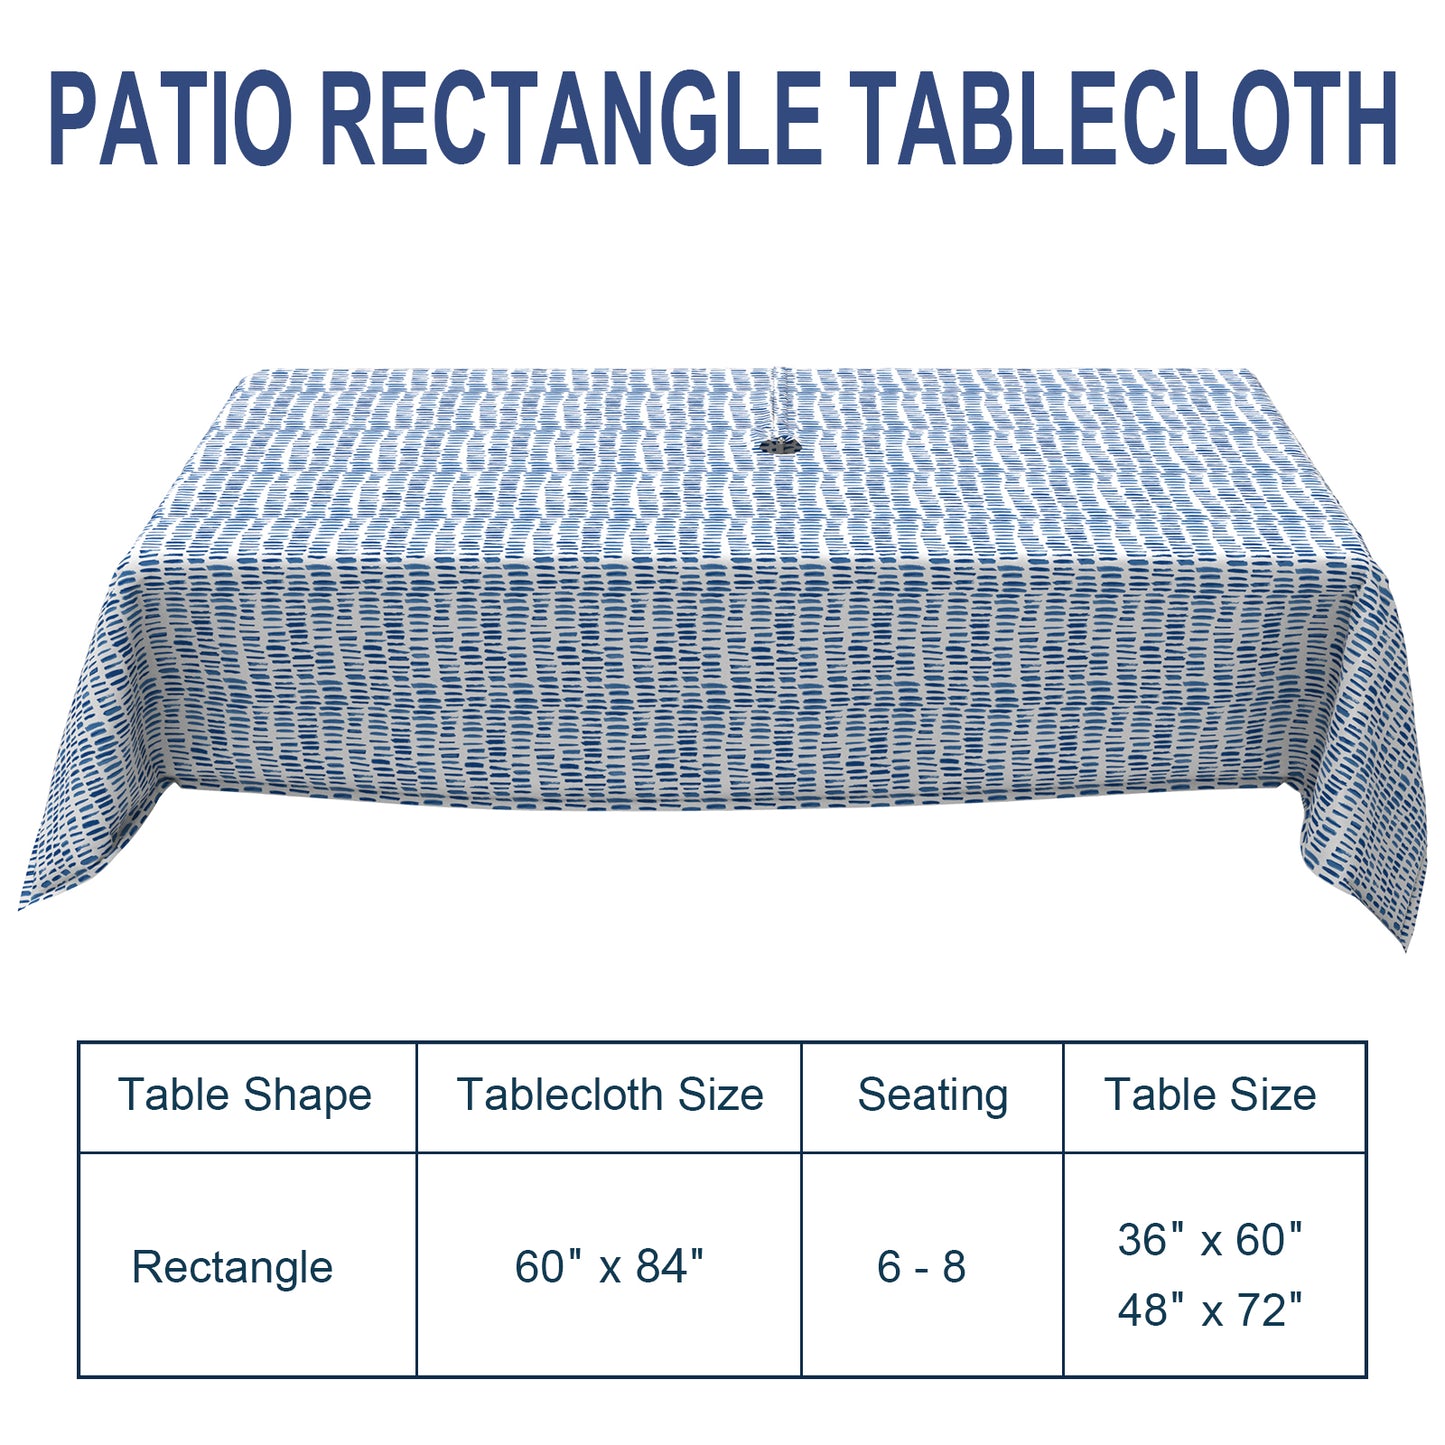 Melody Elephant Outdoor Rectangle Tablecloth, 60×84 Inch Water Repellent Picnic Table Cover with Umbrella Hole Zipper for Patio Family Meal, Pebble Blue